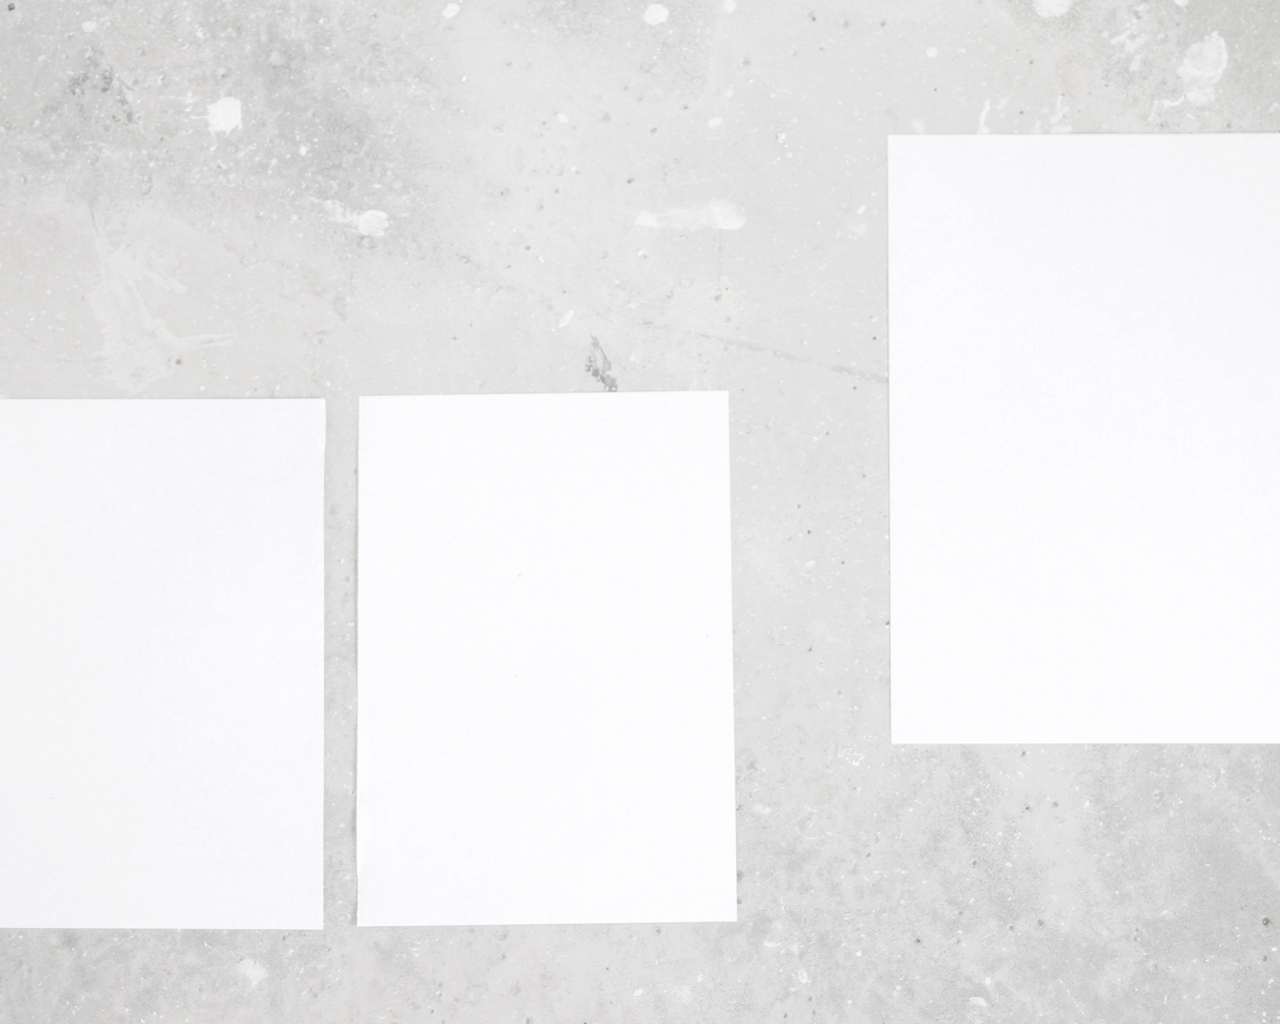 Free download 22] White Aesthetic Wallpaper [2560x1440] for your Desktop, Mobile & Tablet. Explore White Aesthetic Laptop Wallpaper. White Aesthetic Laptop Wallpaper, Aesthetic Laptop Wallpaper, White Aesthetic Wallpaper